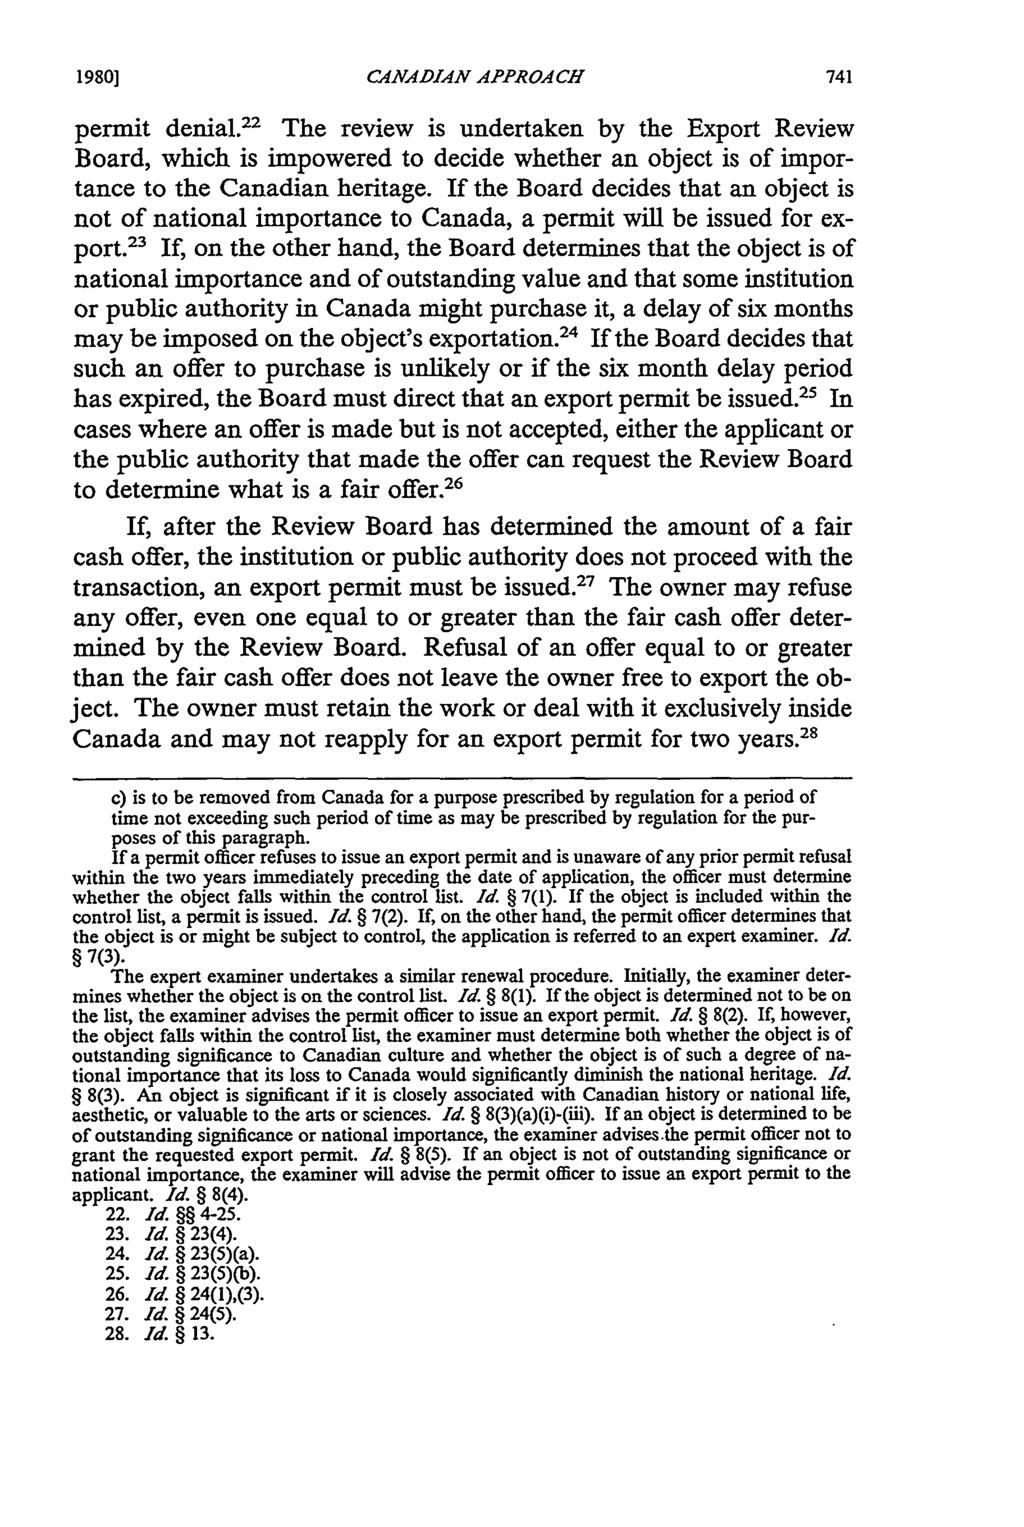 1980] CANADIAN APPROACH permit denial. 2 2 The review is undertaken by the Export Review Board, which is impowered to decide whether an object is of importance to the Canadian heritage.